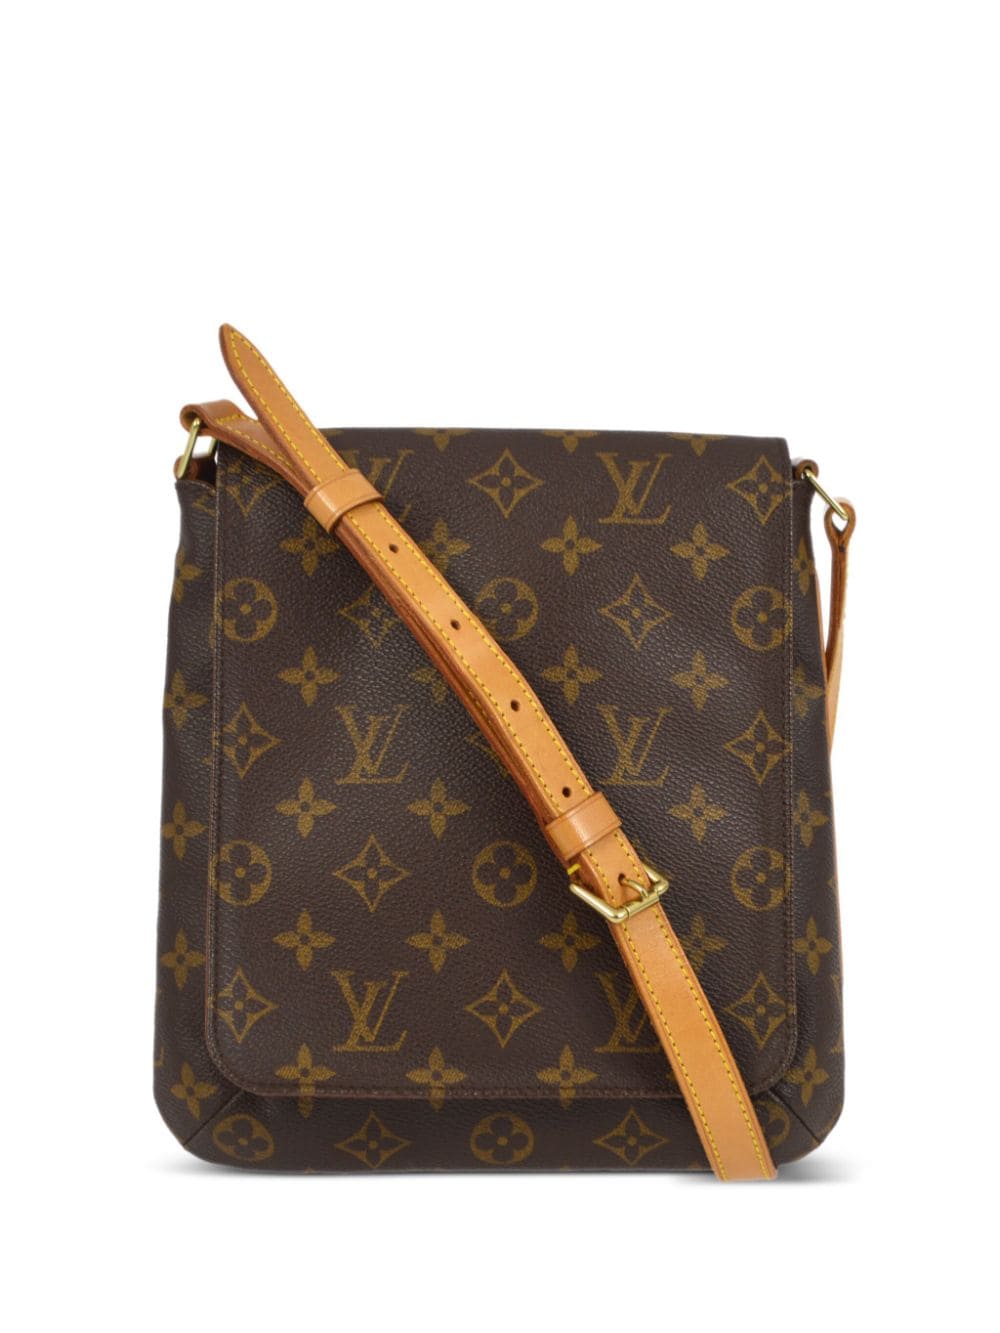 Louis Vuitton Pre-Owned 2000 pre-owned Musette Salsa Schultertasche - Braun von Louis Vuitton Pre-Owned